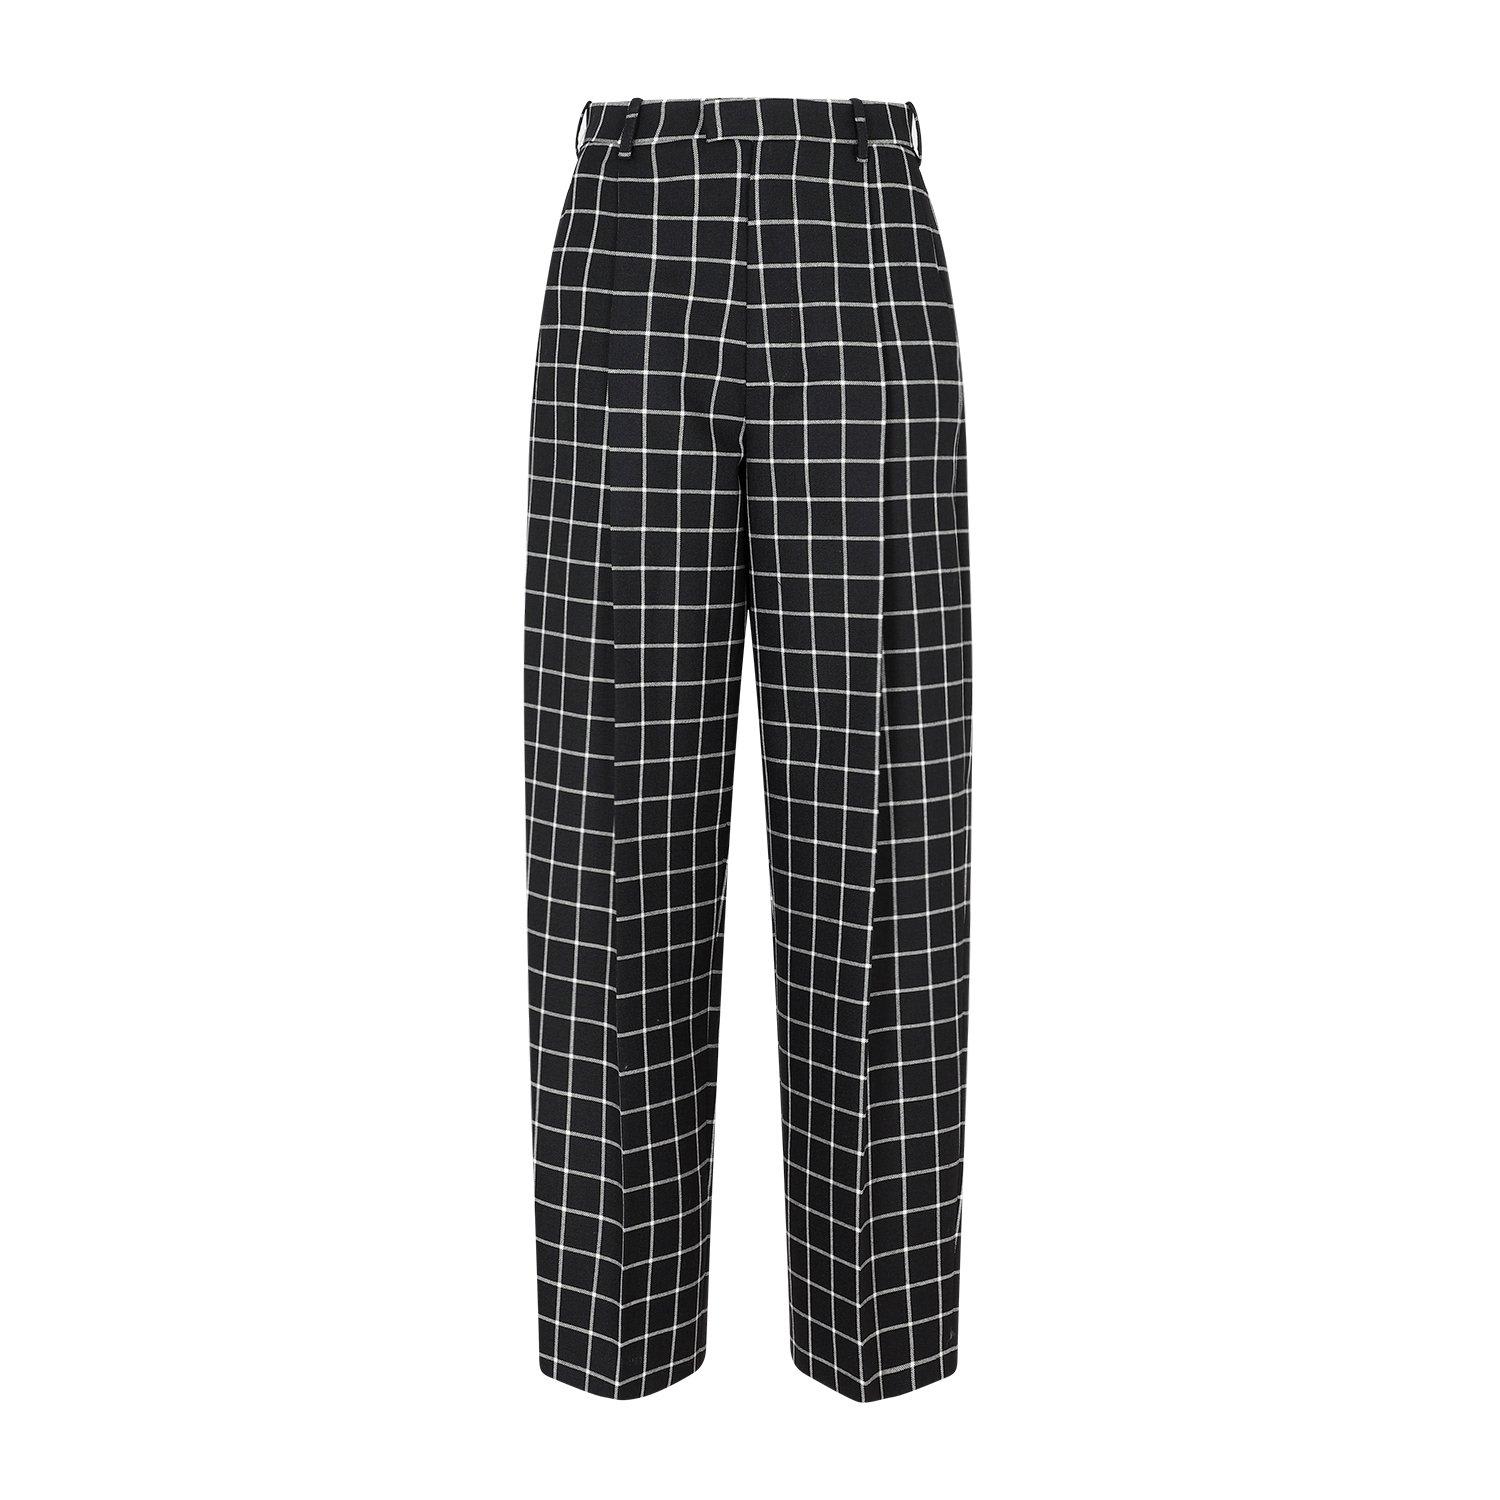 MARNI CHECK PATTERNED TROUSERS